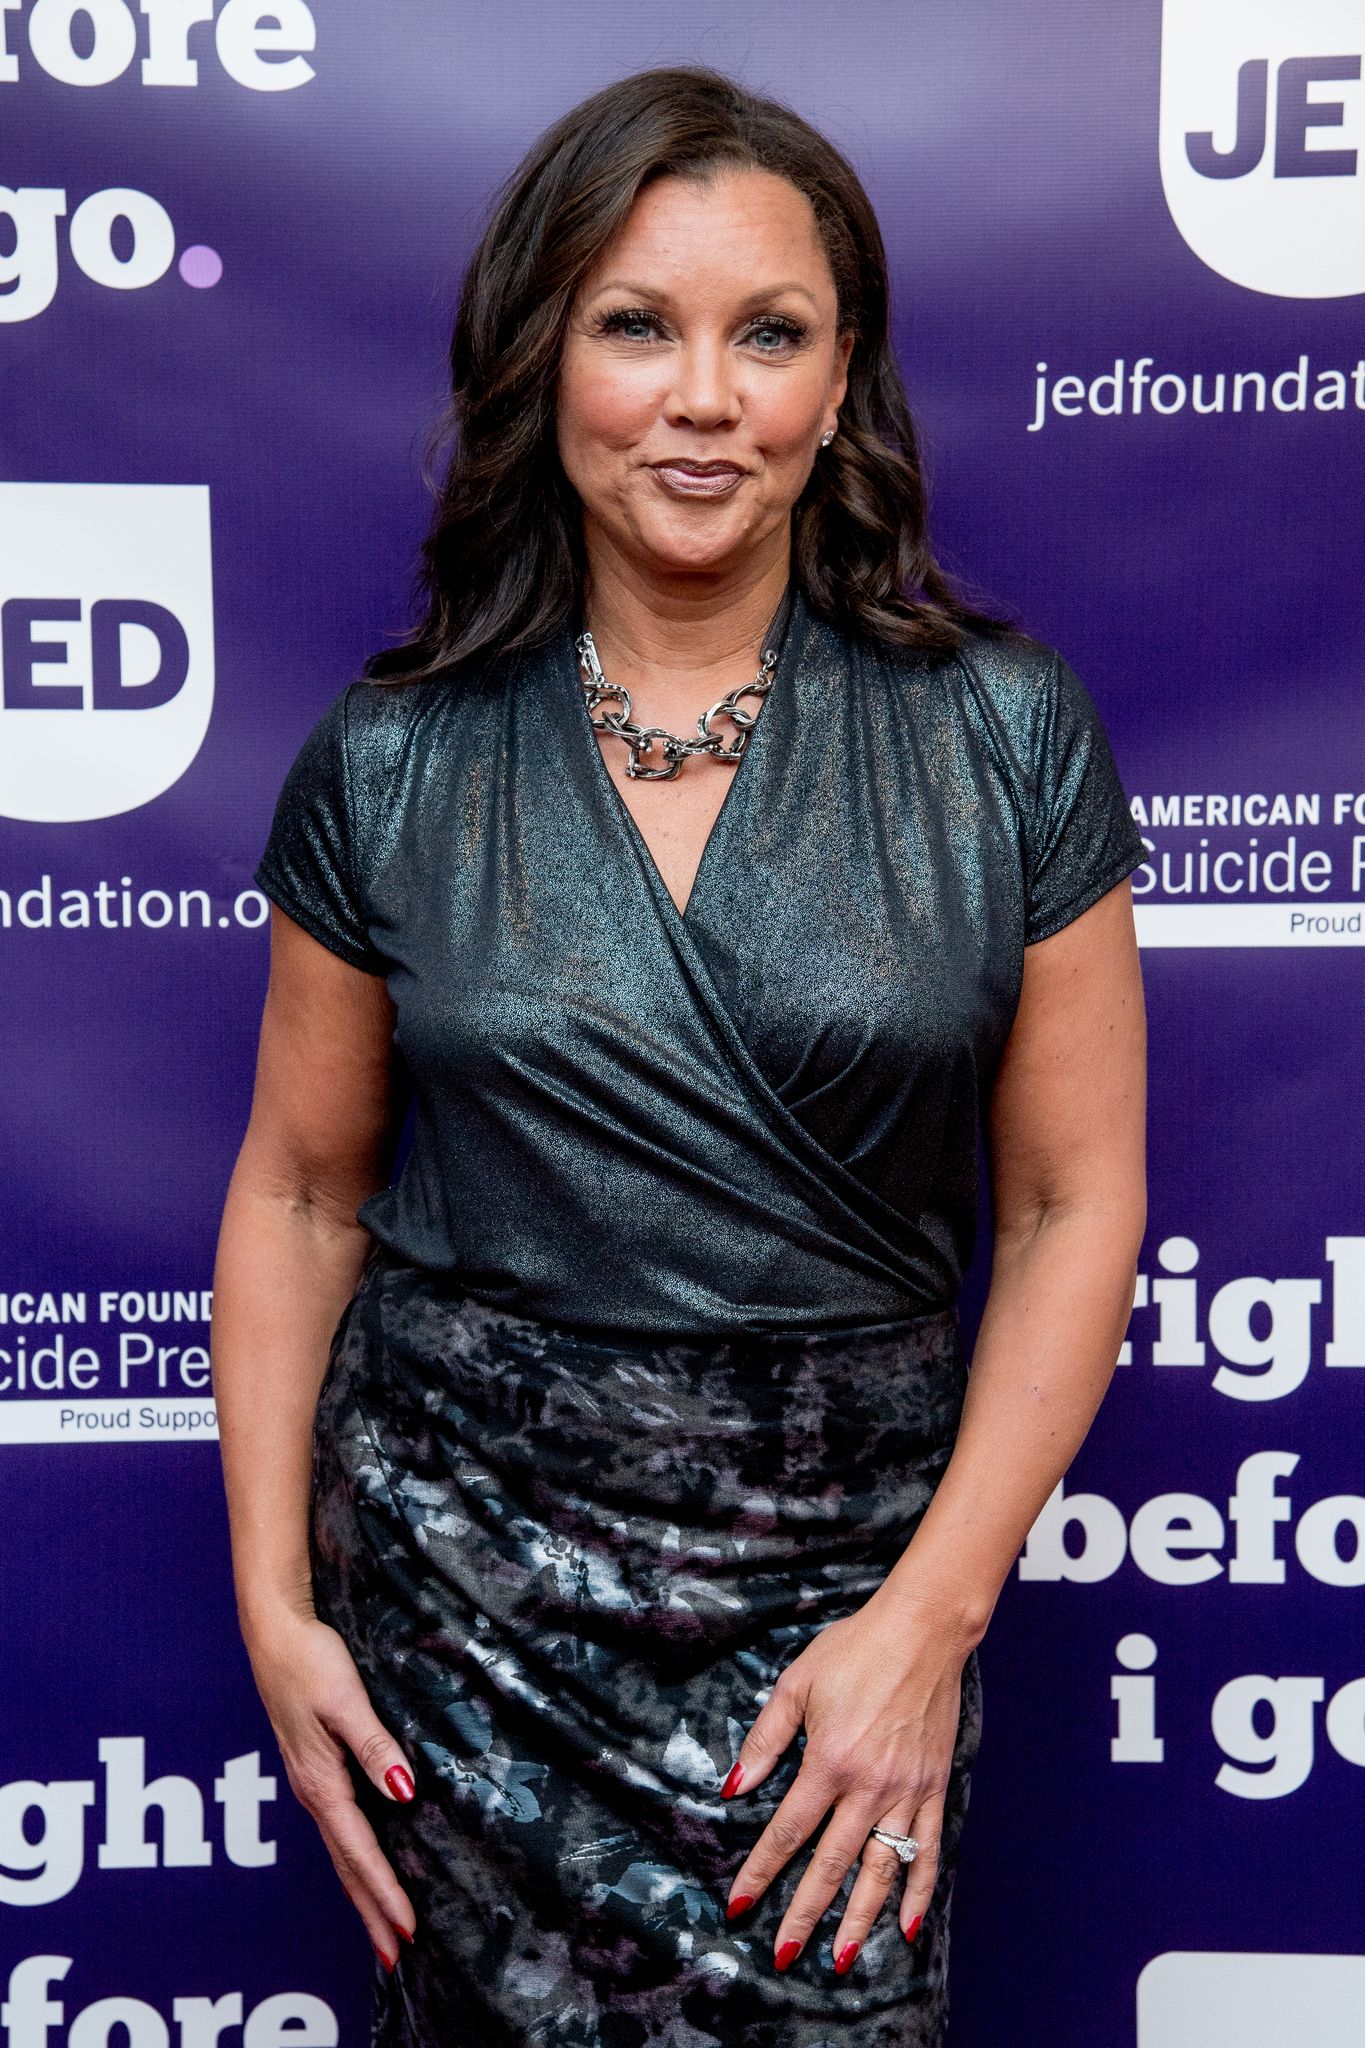 Vanessa Williams at a benefit performance on December 4, 2017 in New York. | Photo: Getty Images